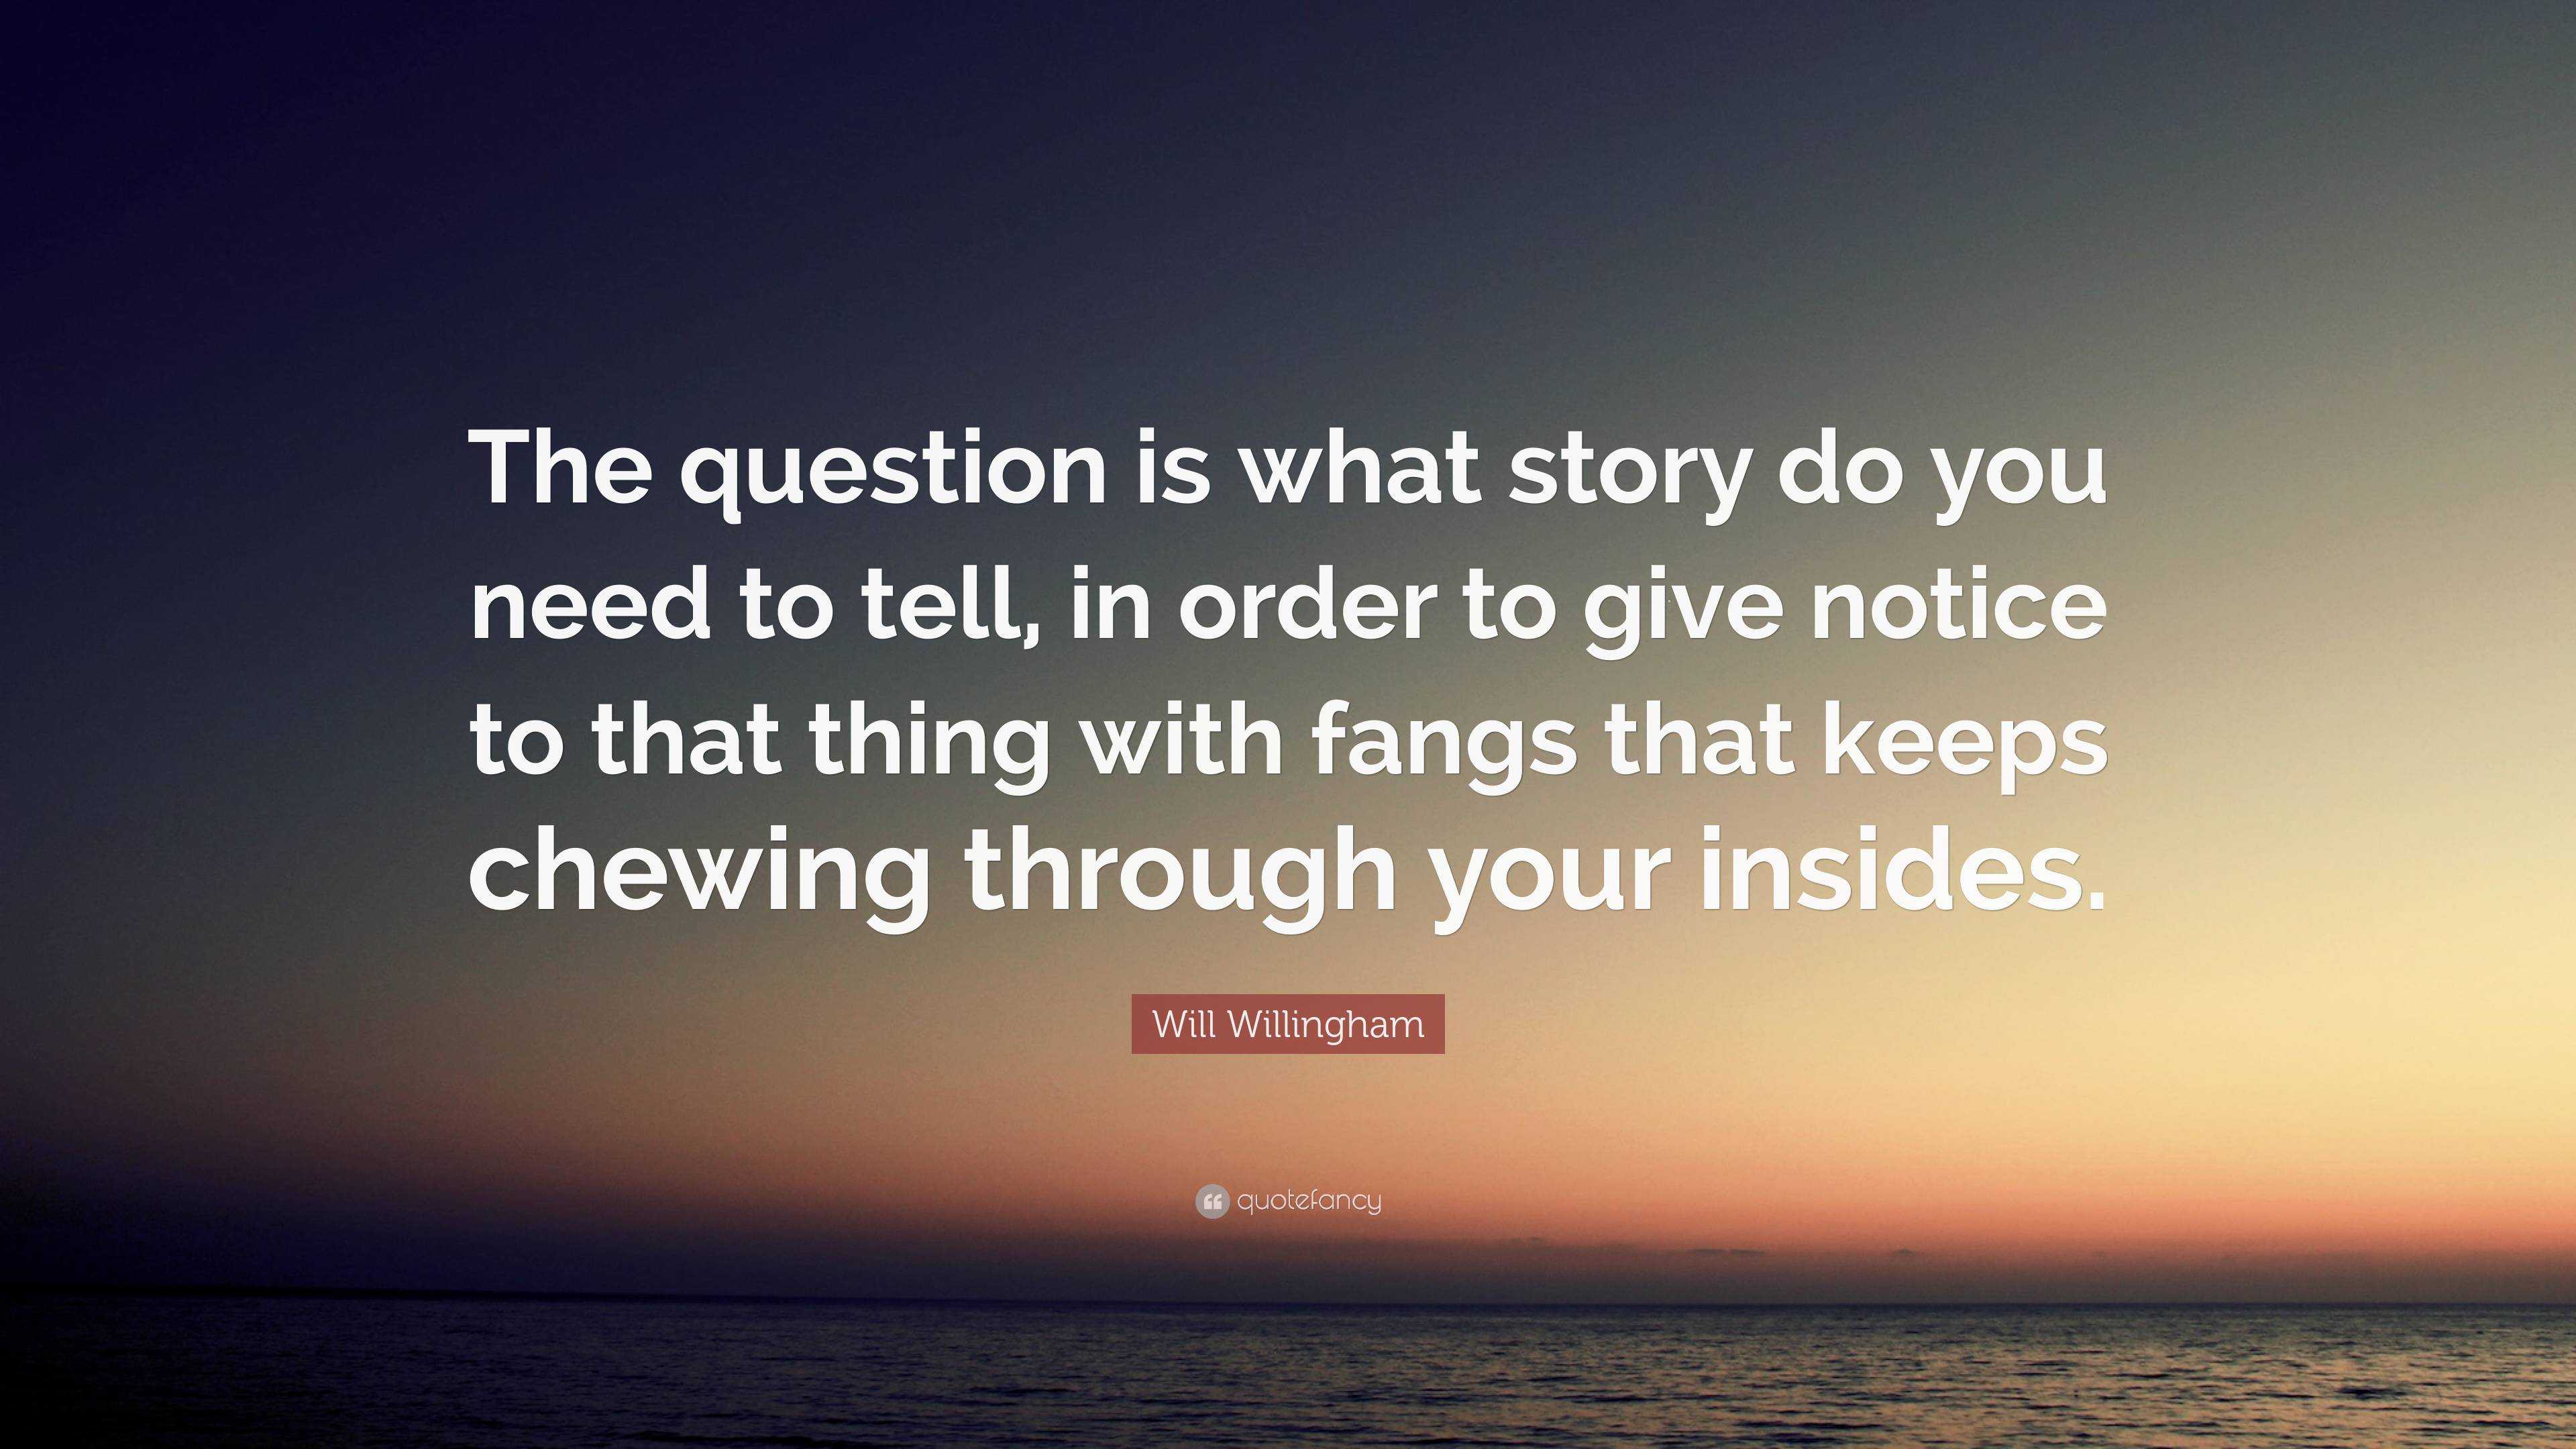 Will Willingham Quote: “The question is what story do you need to tell ...